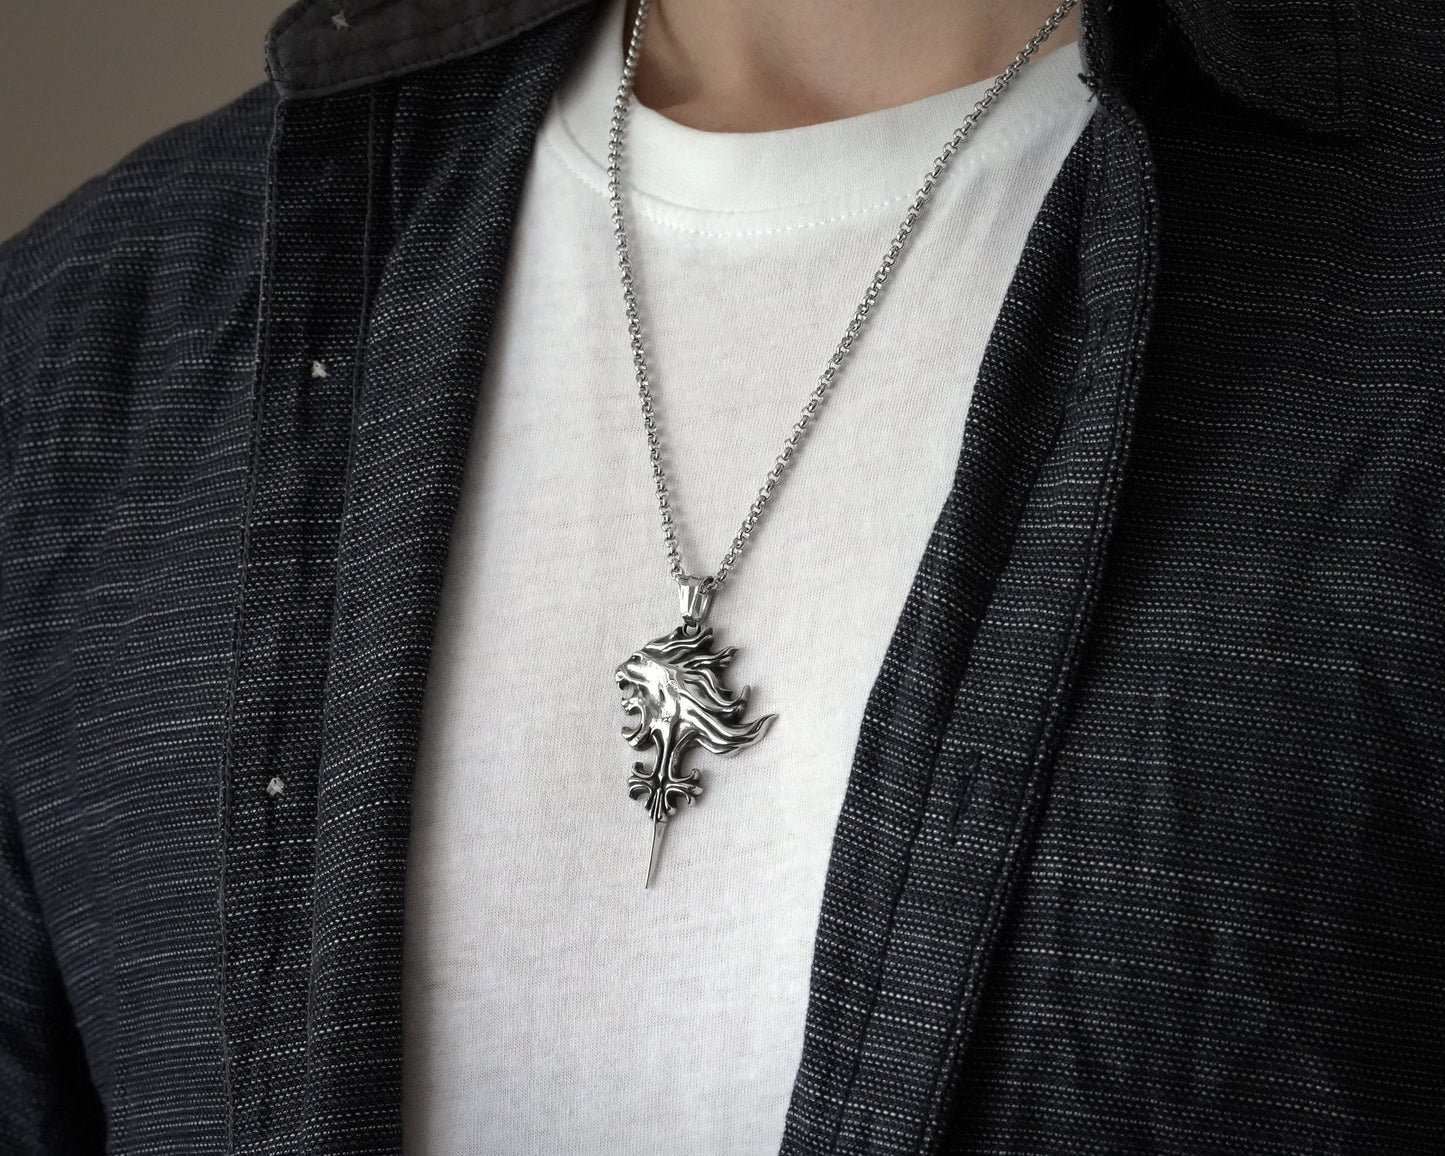 Final Fantasy VIII Large Squall Leonhart Griever Necklace Sterling Silver Pendant Jewelry - Baldur Jewelry